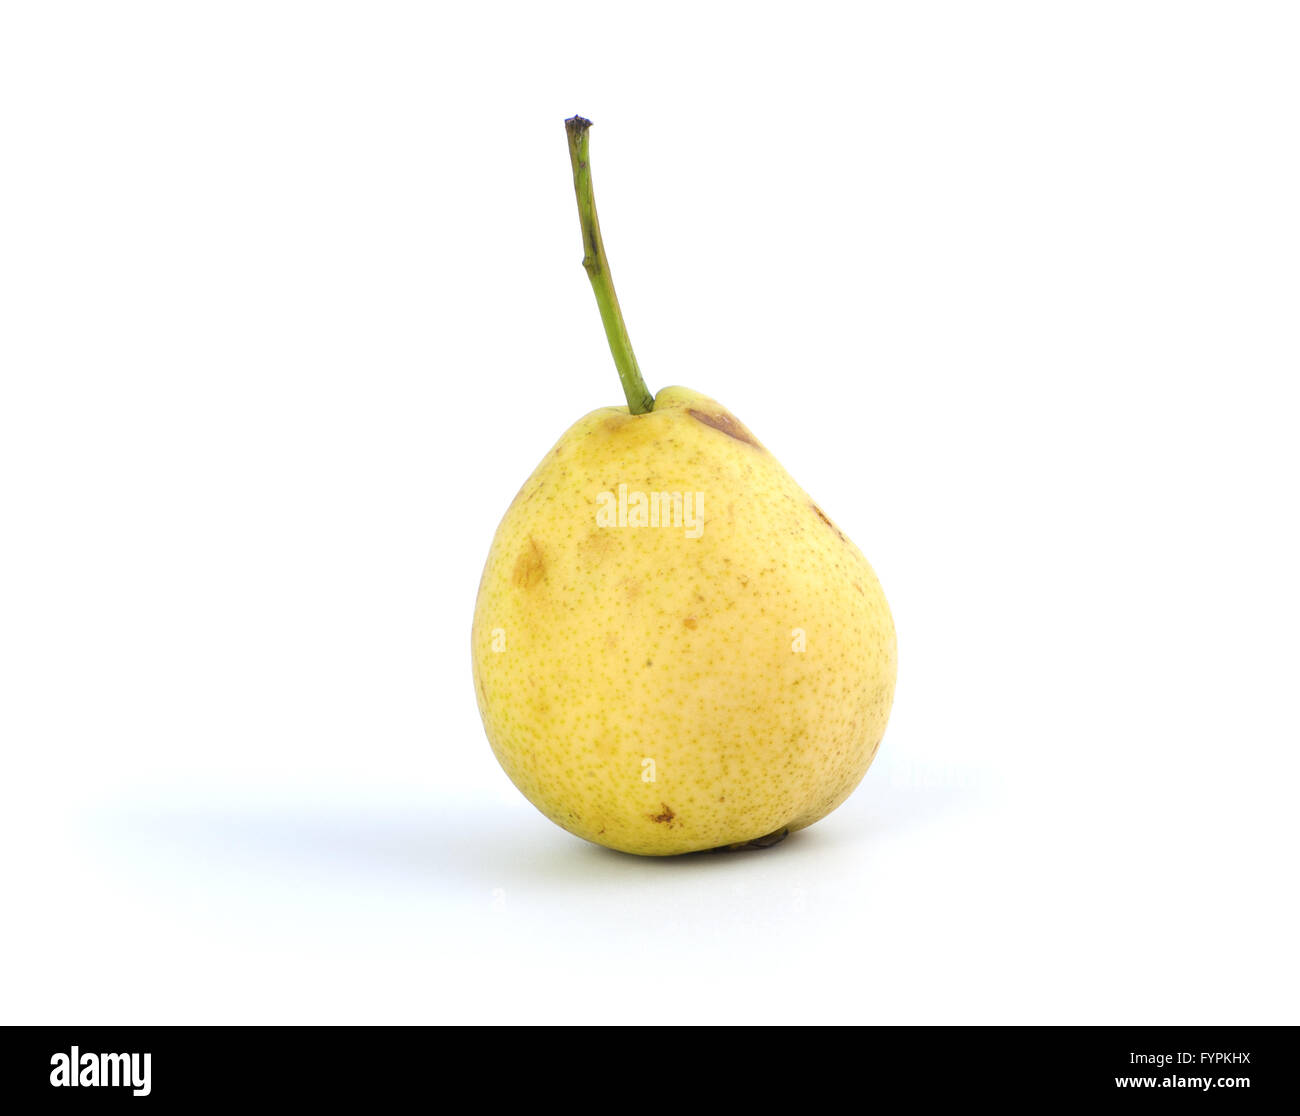 Pear, which began to deteriorate. Stock Photo